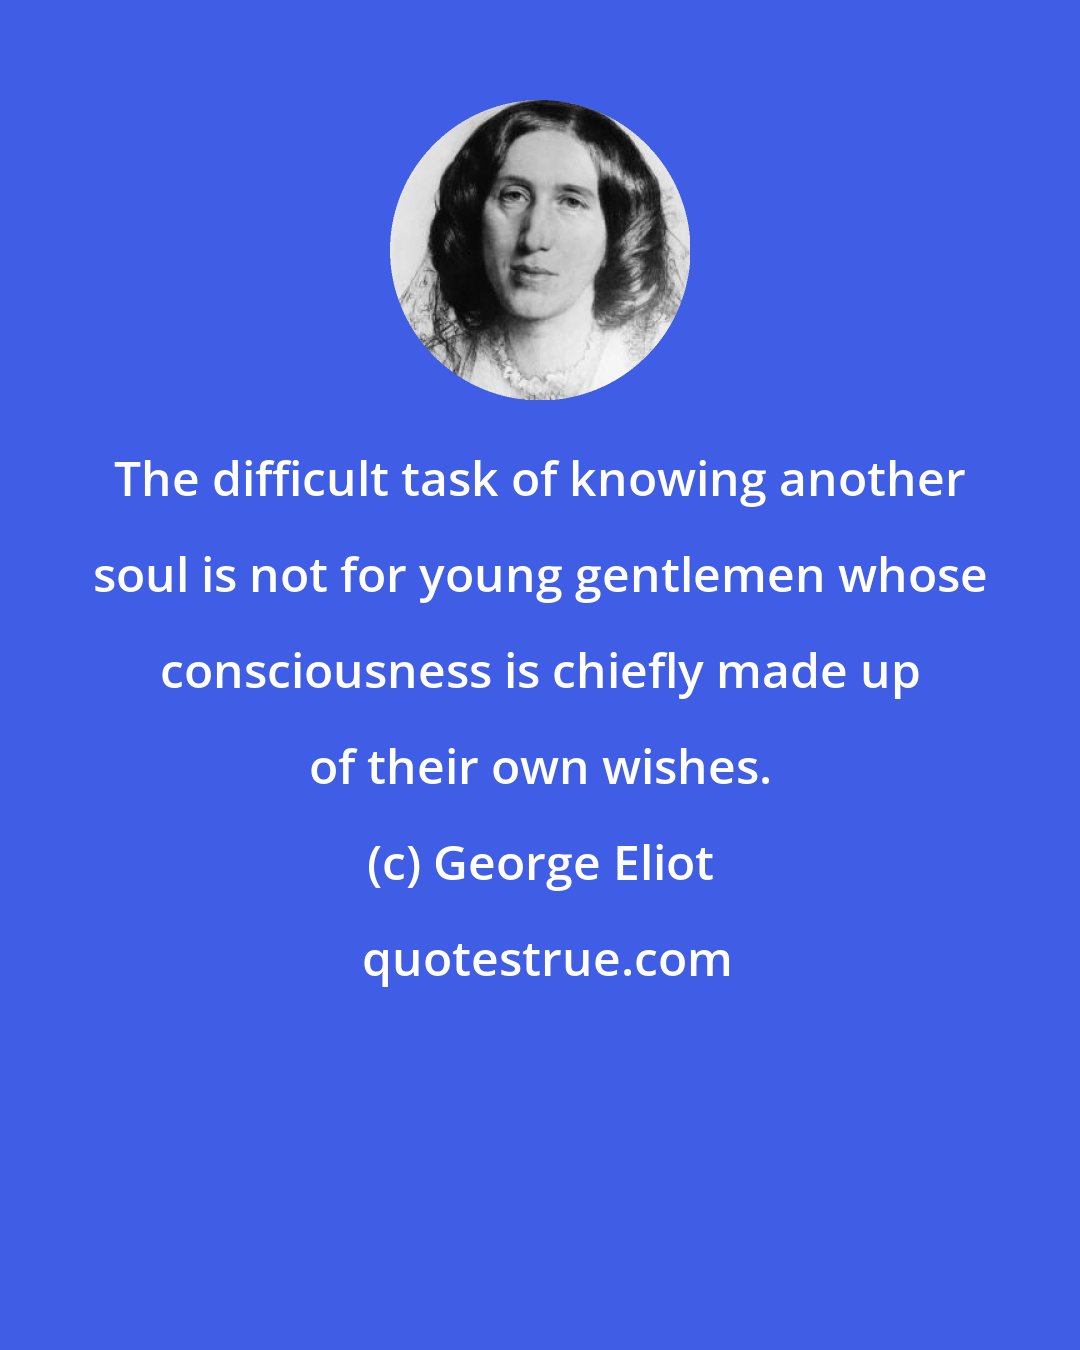 George Eliot: The difficult task of knowing another soul is not for young gentlemen whose consciousness is chiefly made up of their own wishes.